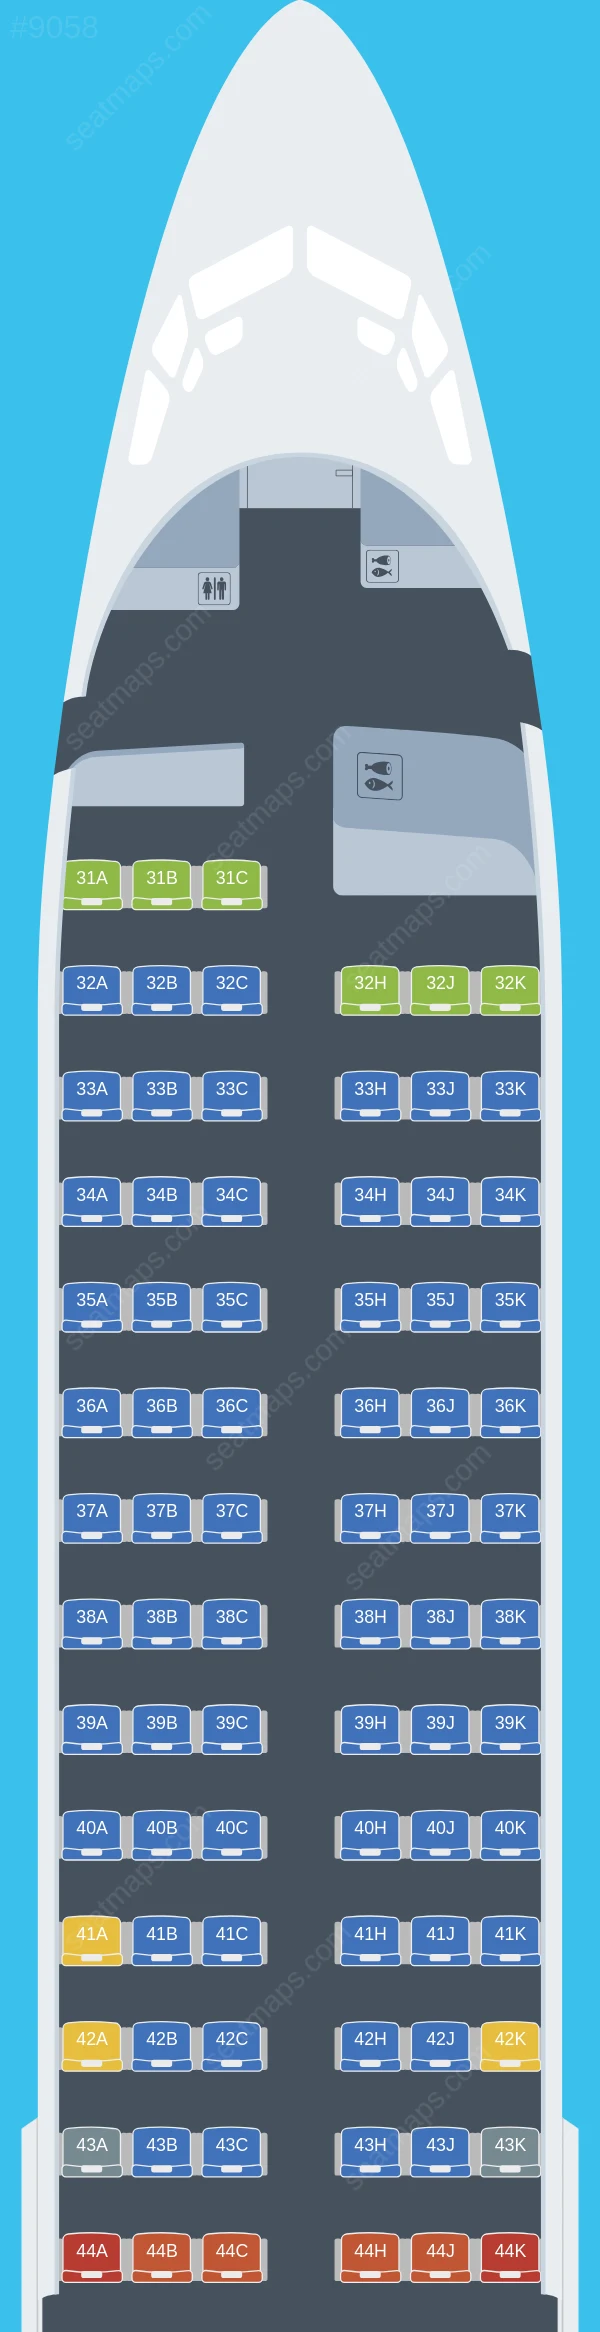 Hainan Airlines Boeing 737-800 V.2 seatmap preview